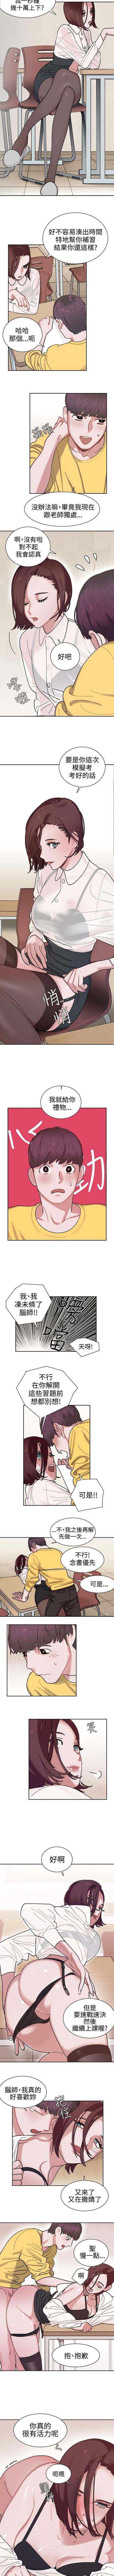 Erotic 辣魅當家 1-46 Ngentot - Page 5